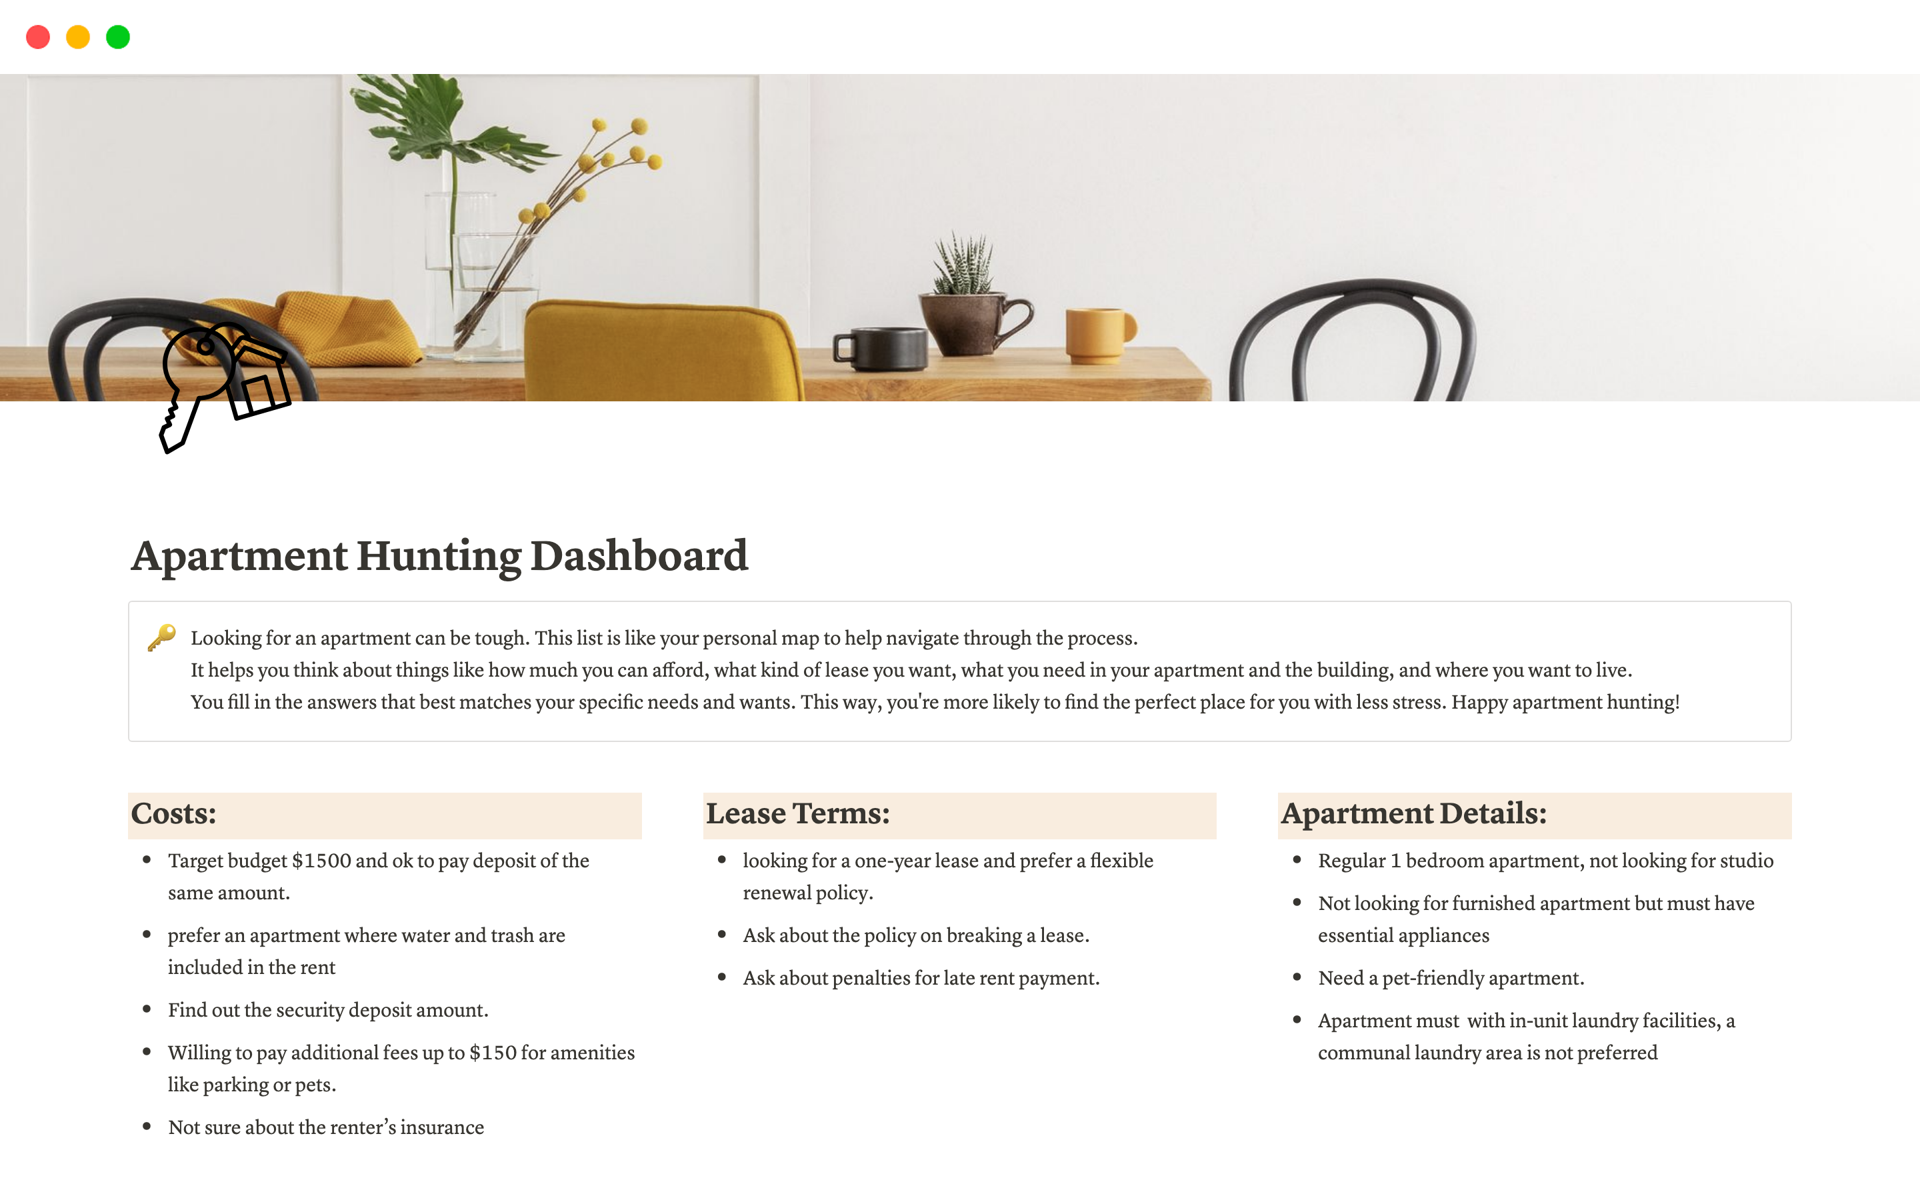 This Apartment Hunting Template is your personal helper in finding a new place. It makes you think about the cost, lease type, and where you want to live, making it easier to choose the right place.